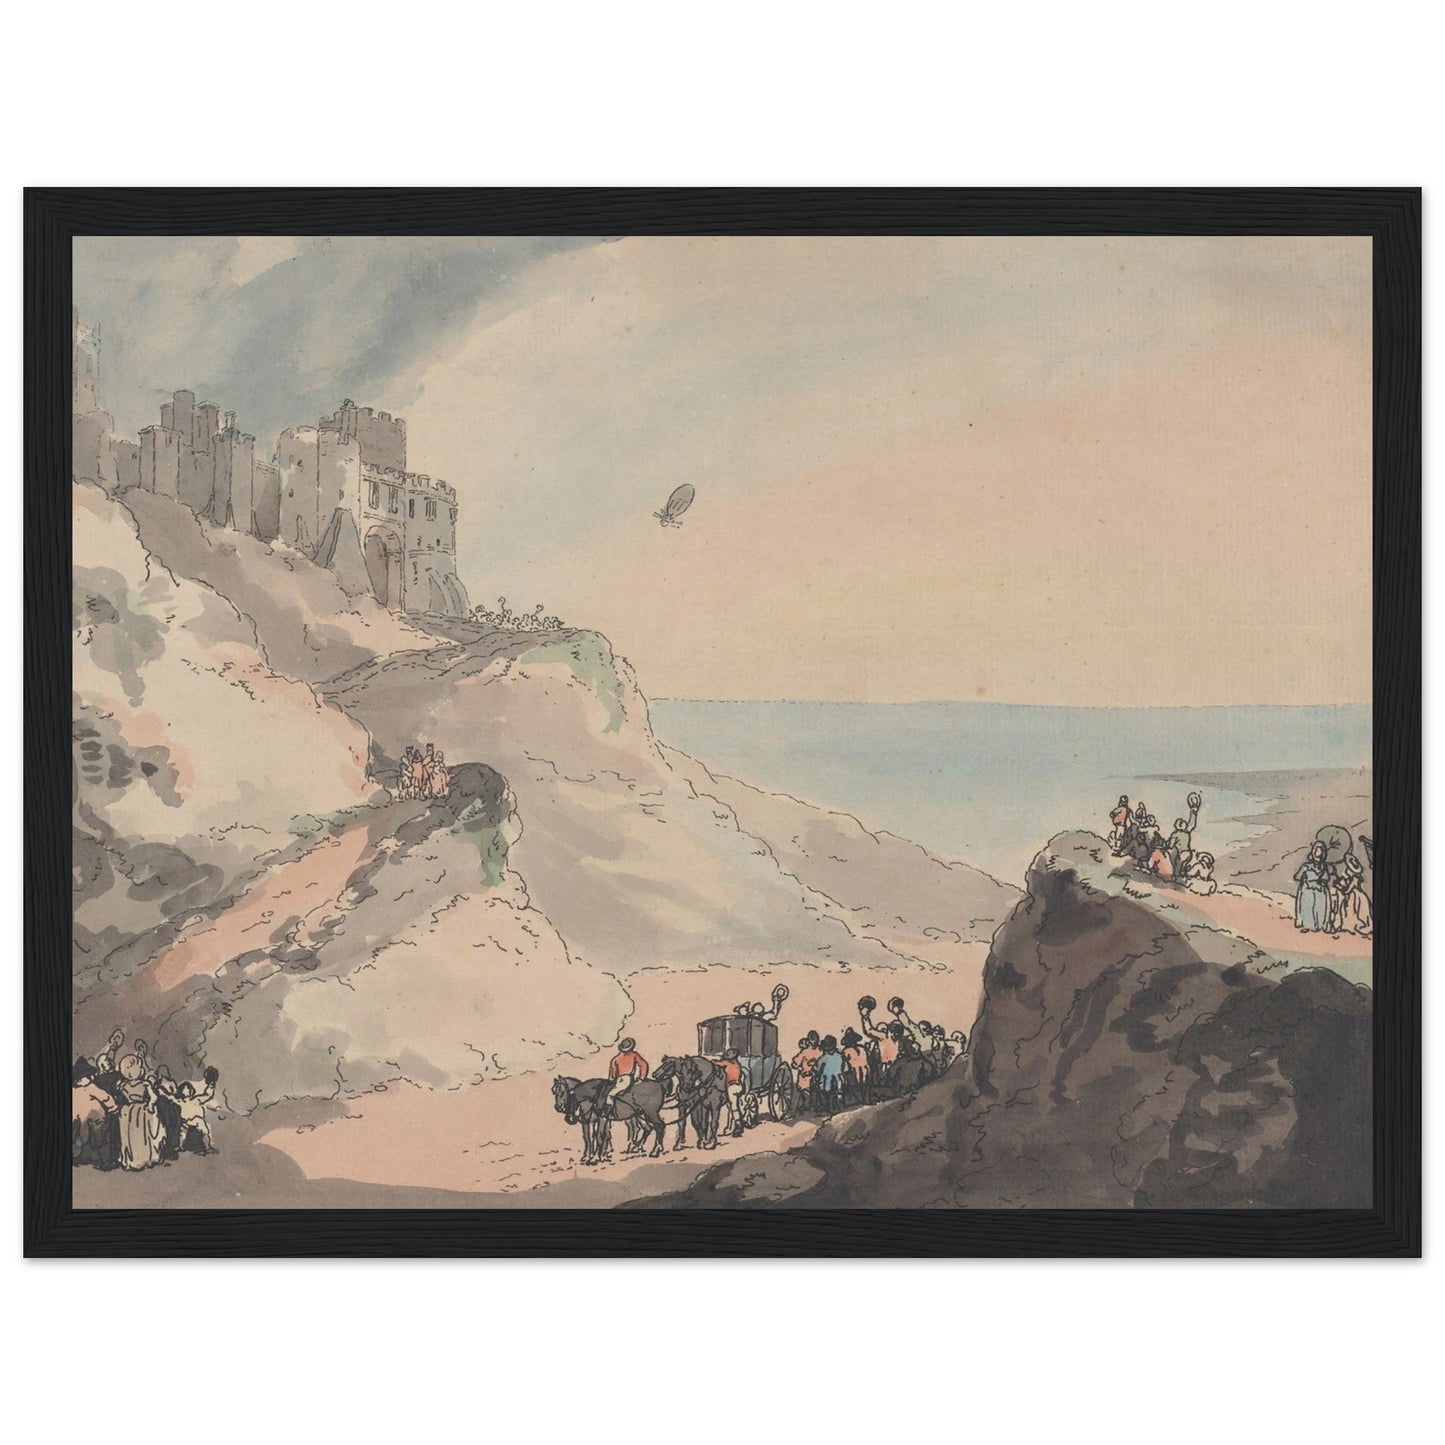 Blanchard and Jeffries' Balloon from Dover artwork print black frame | By Print Room Ltd